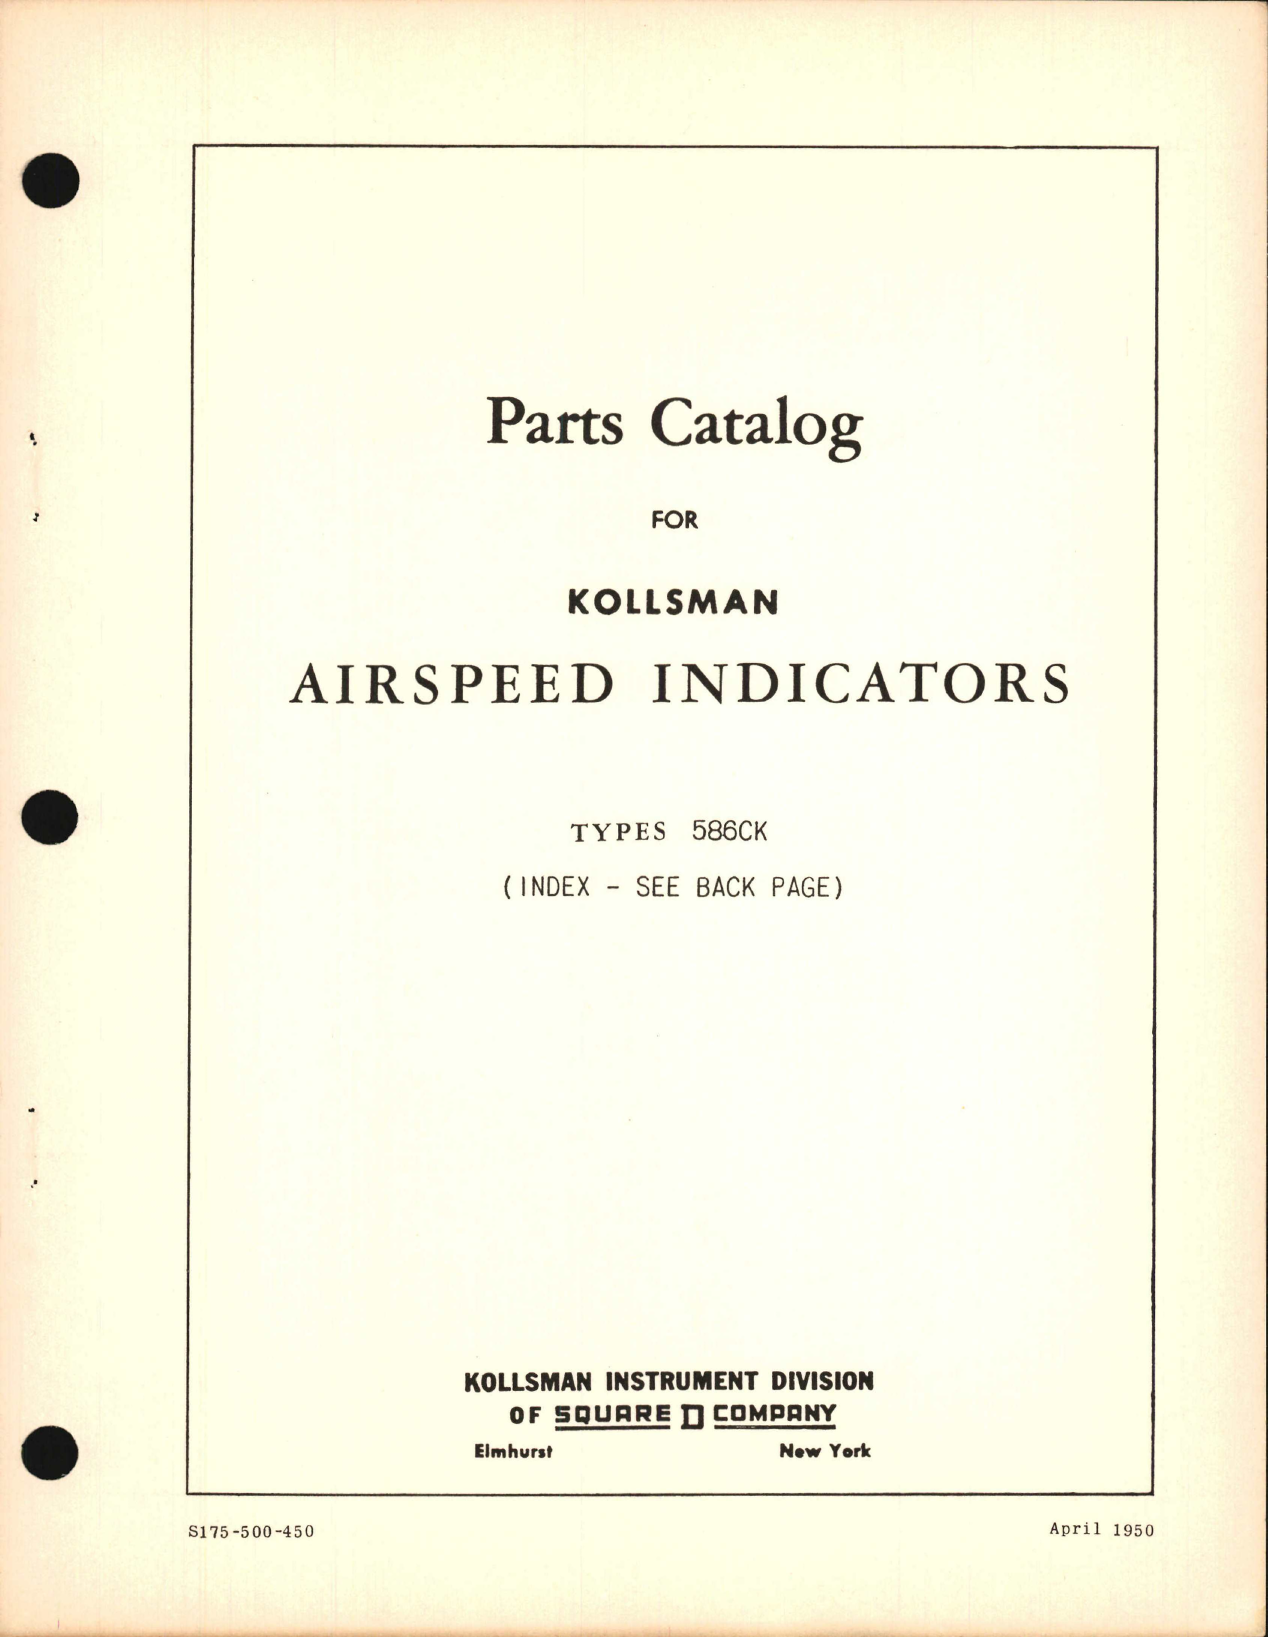 Sample page 1 from AirCorps Library document: Parts Catalog for Kollsman Air Speed Indicators Types 586CK